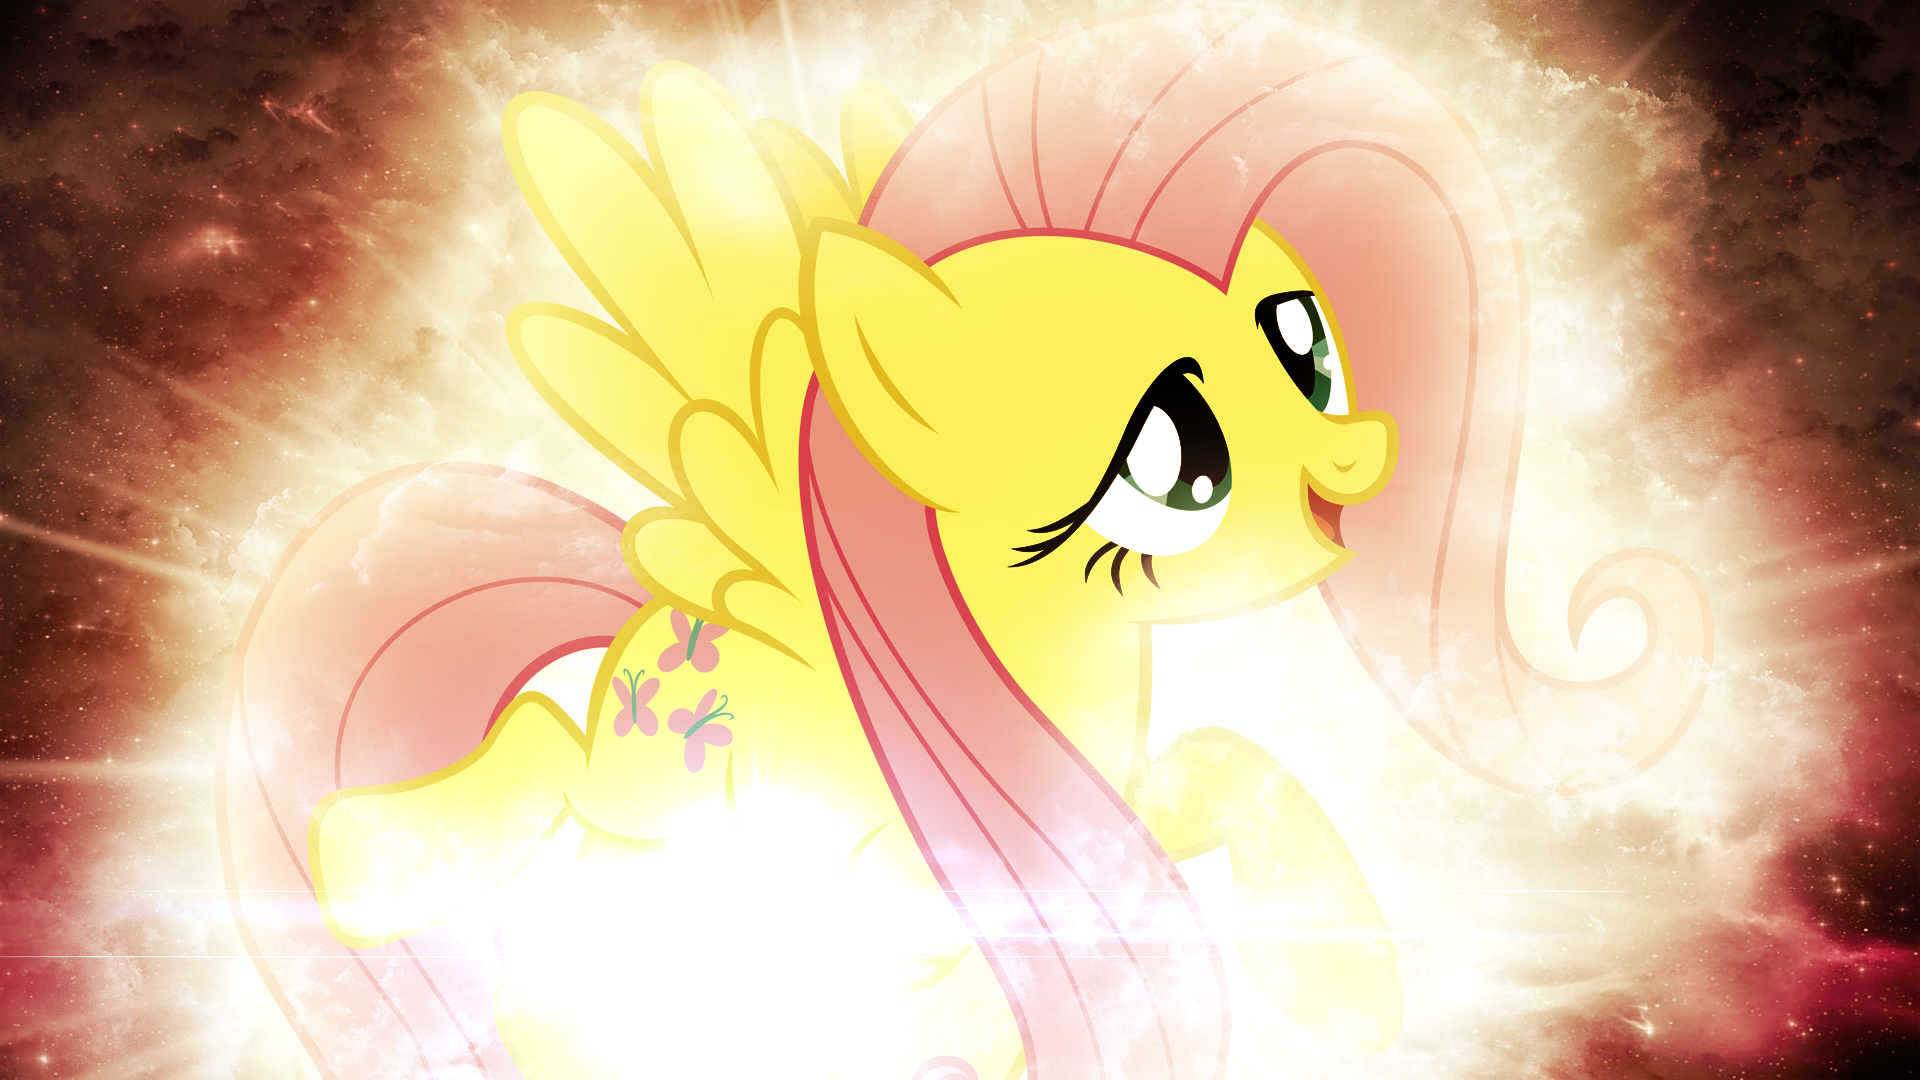 Fluttershy Really Likes Flying - Wallpaper by Tzolkine and xPesifeindx